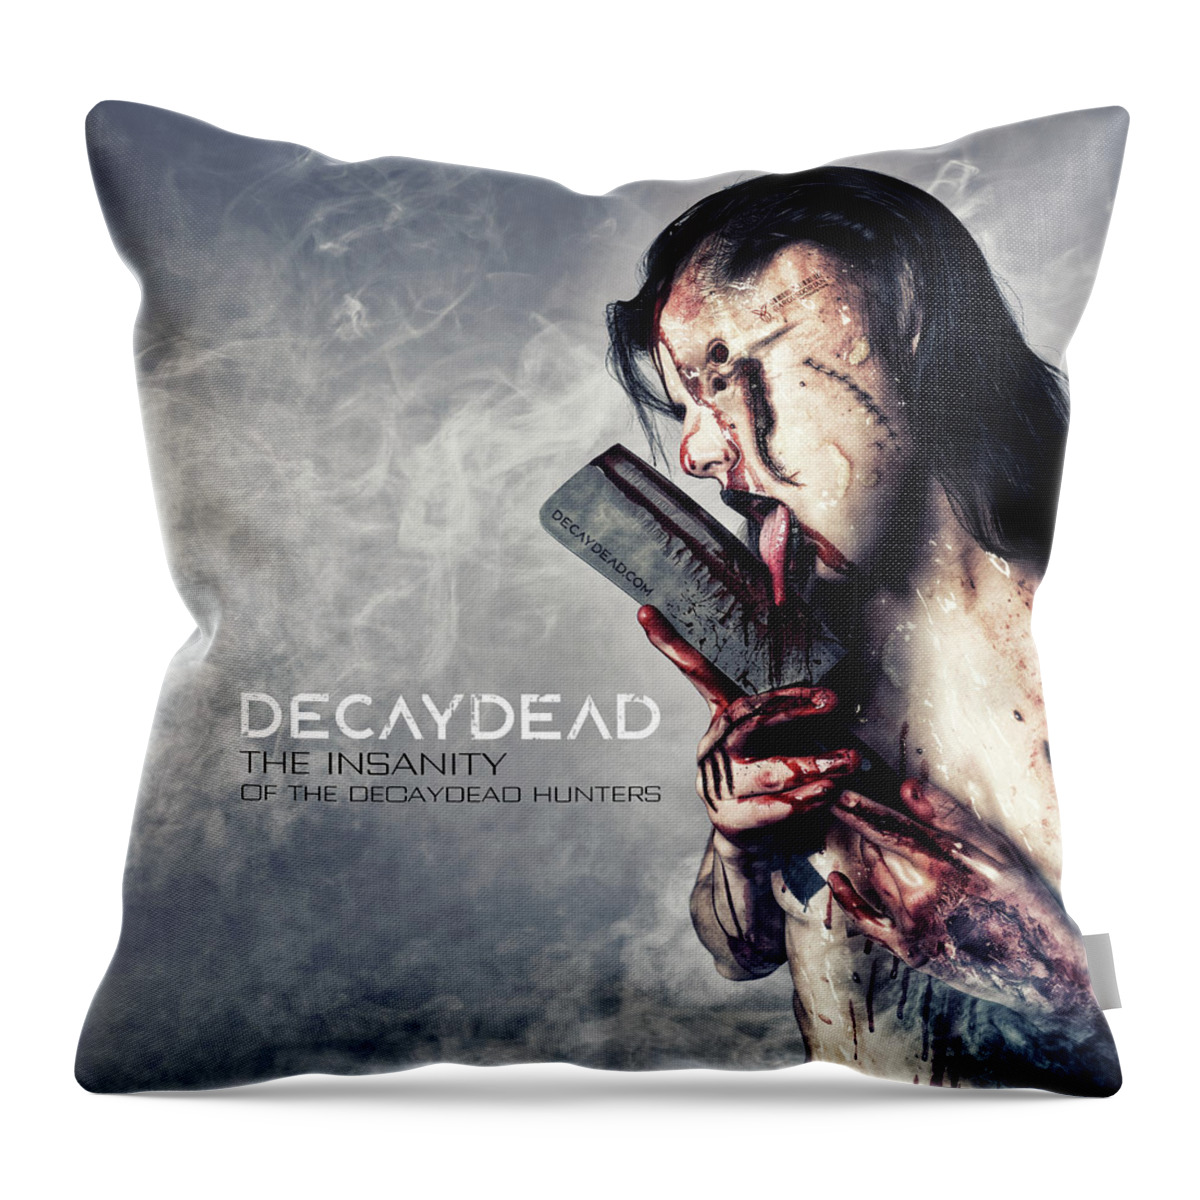 Argus Dorian Throw Pillow featuring the digital art The Insanity of the Decaydead Hunters by Argus Dorian